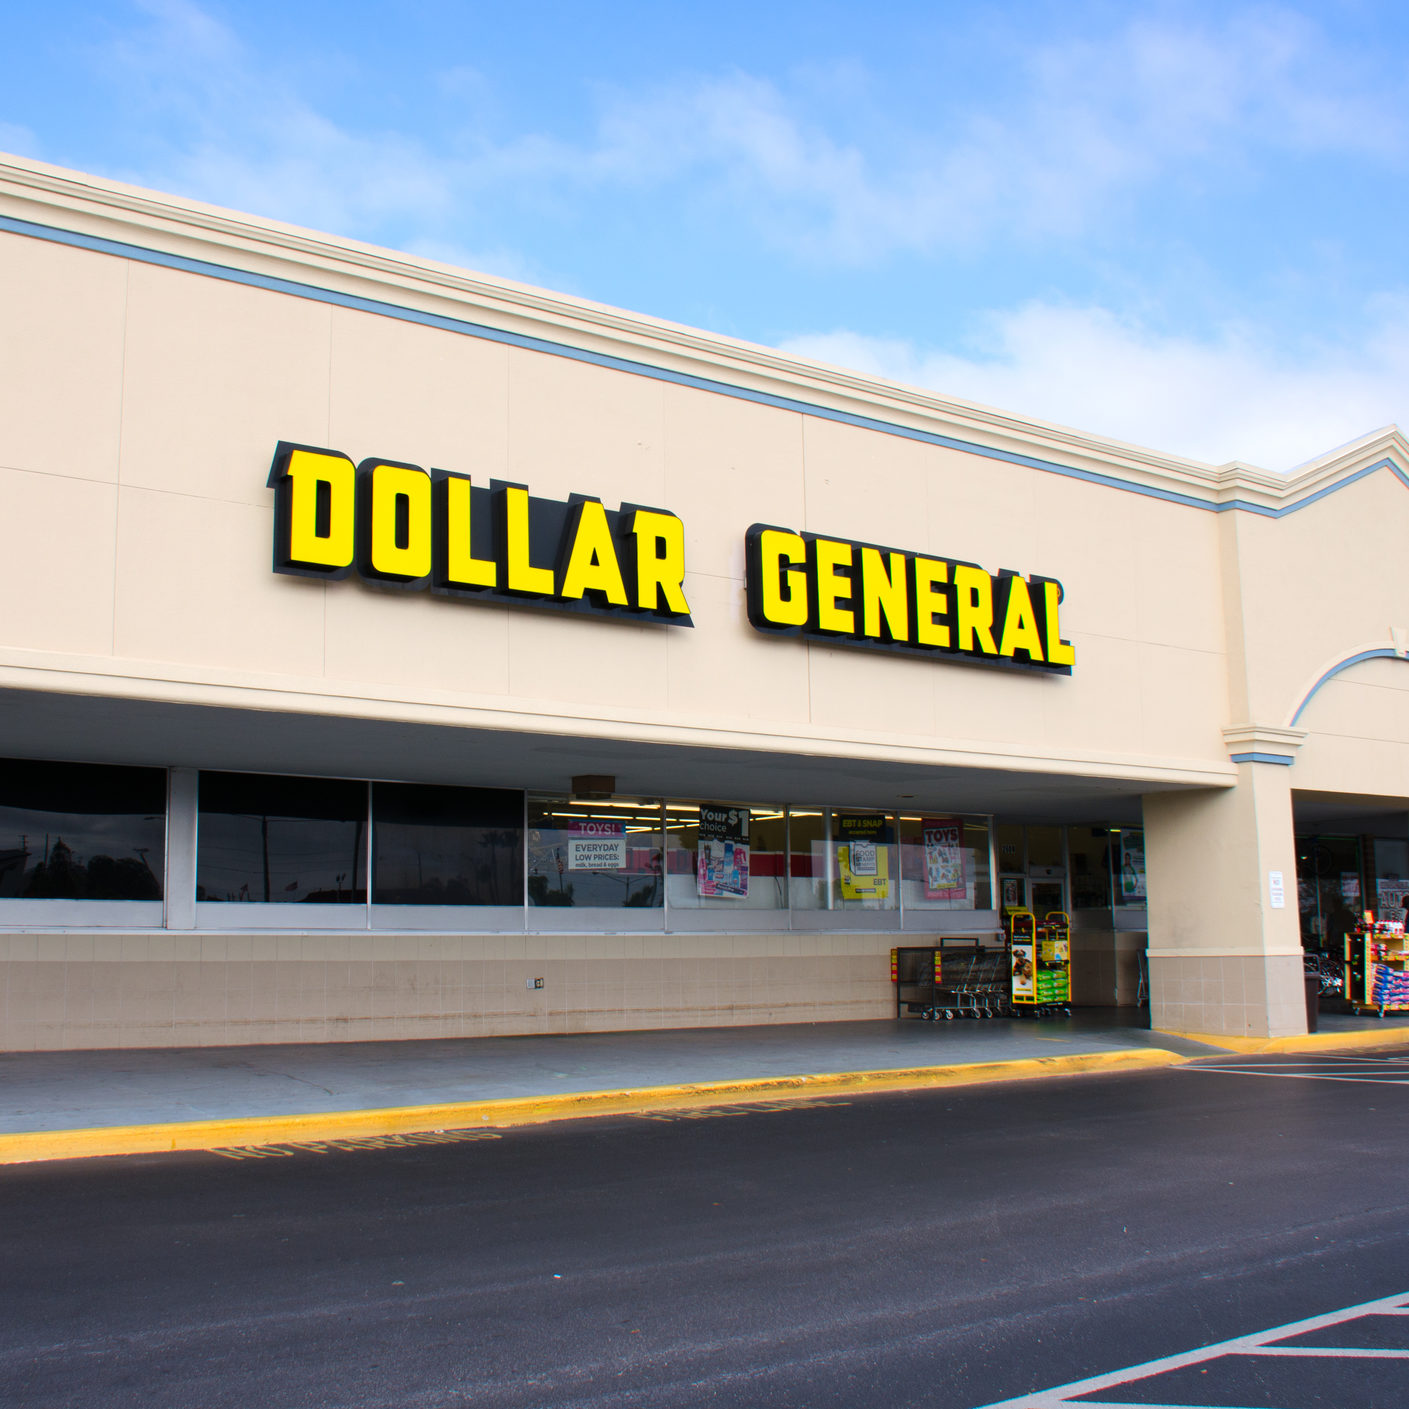 Dollar General: Save 20% on select gift cards